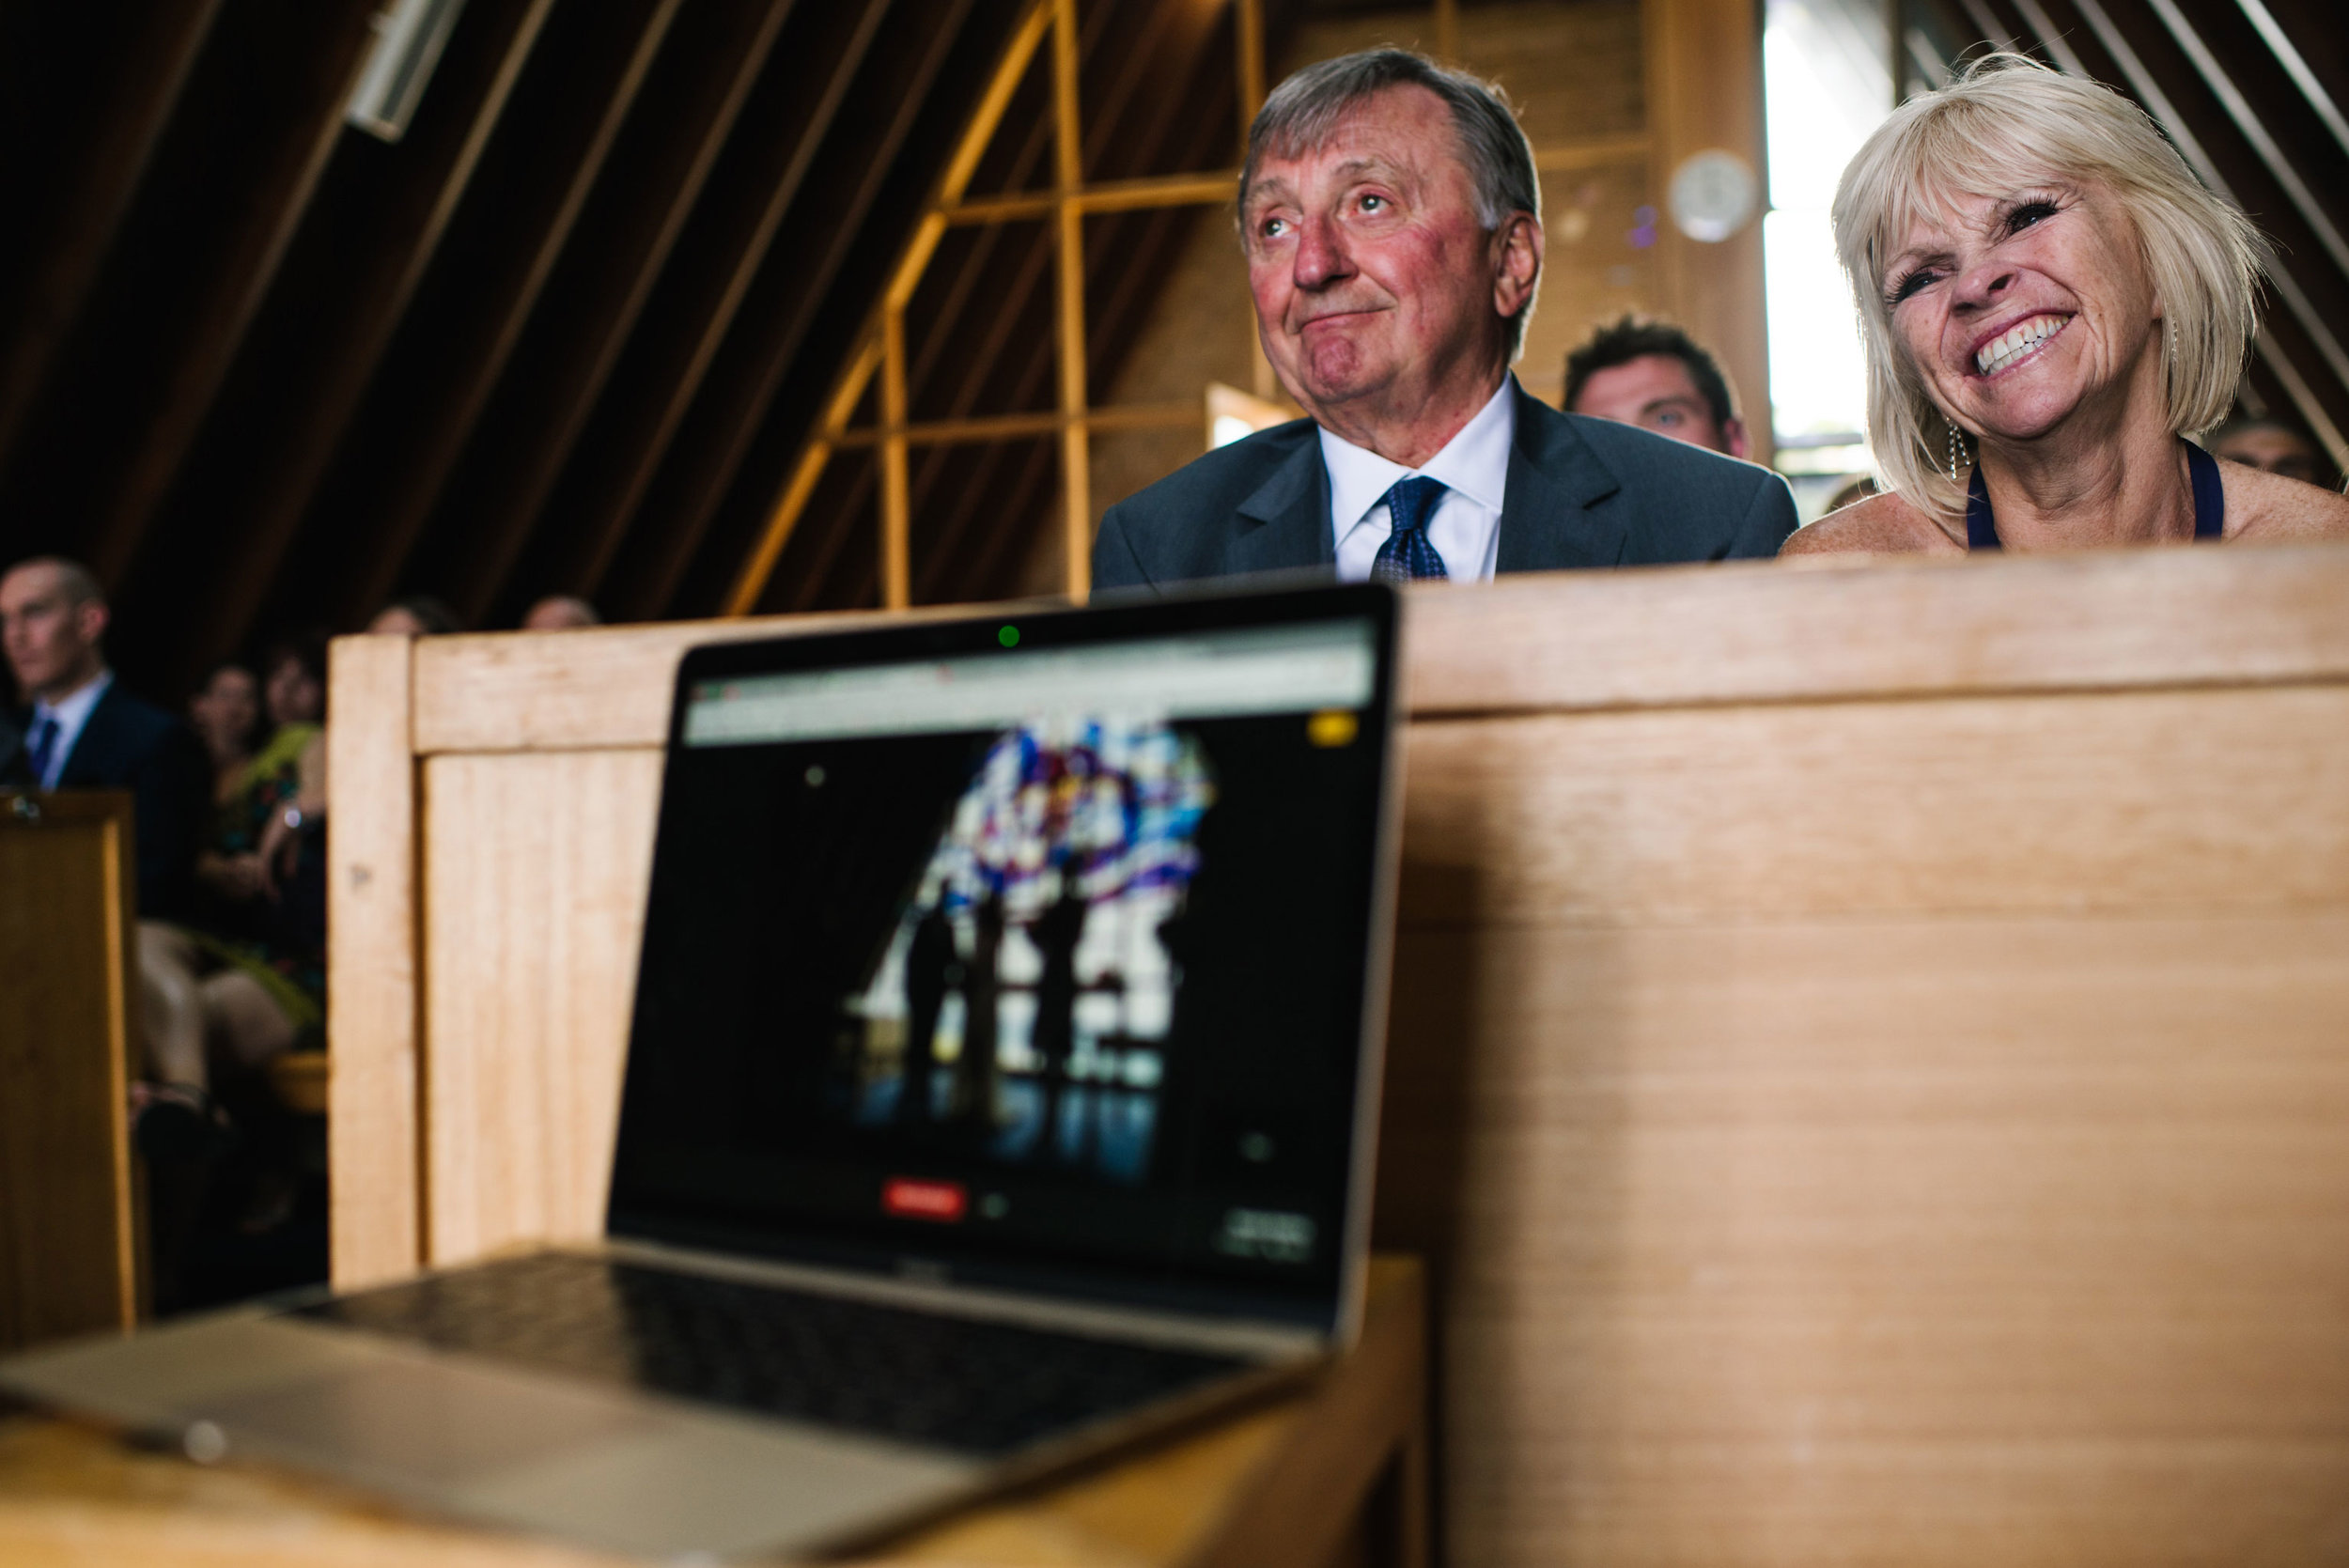 Parents of the bride smile as they watch wedding ceremony